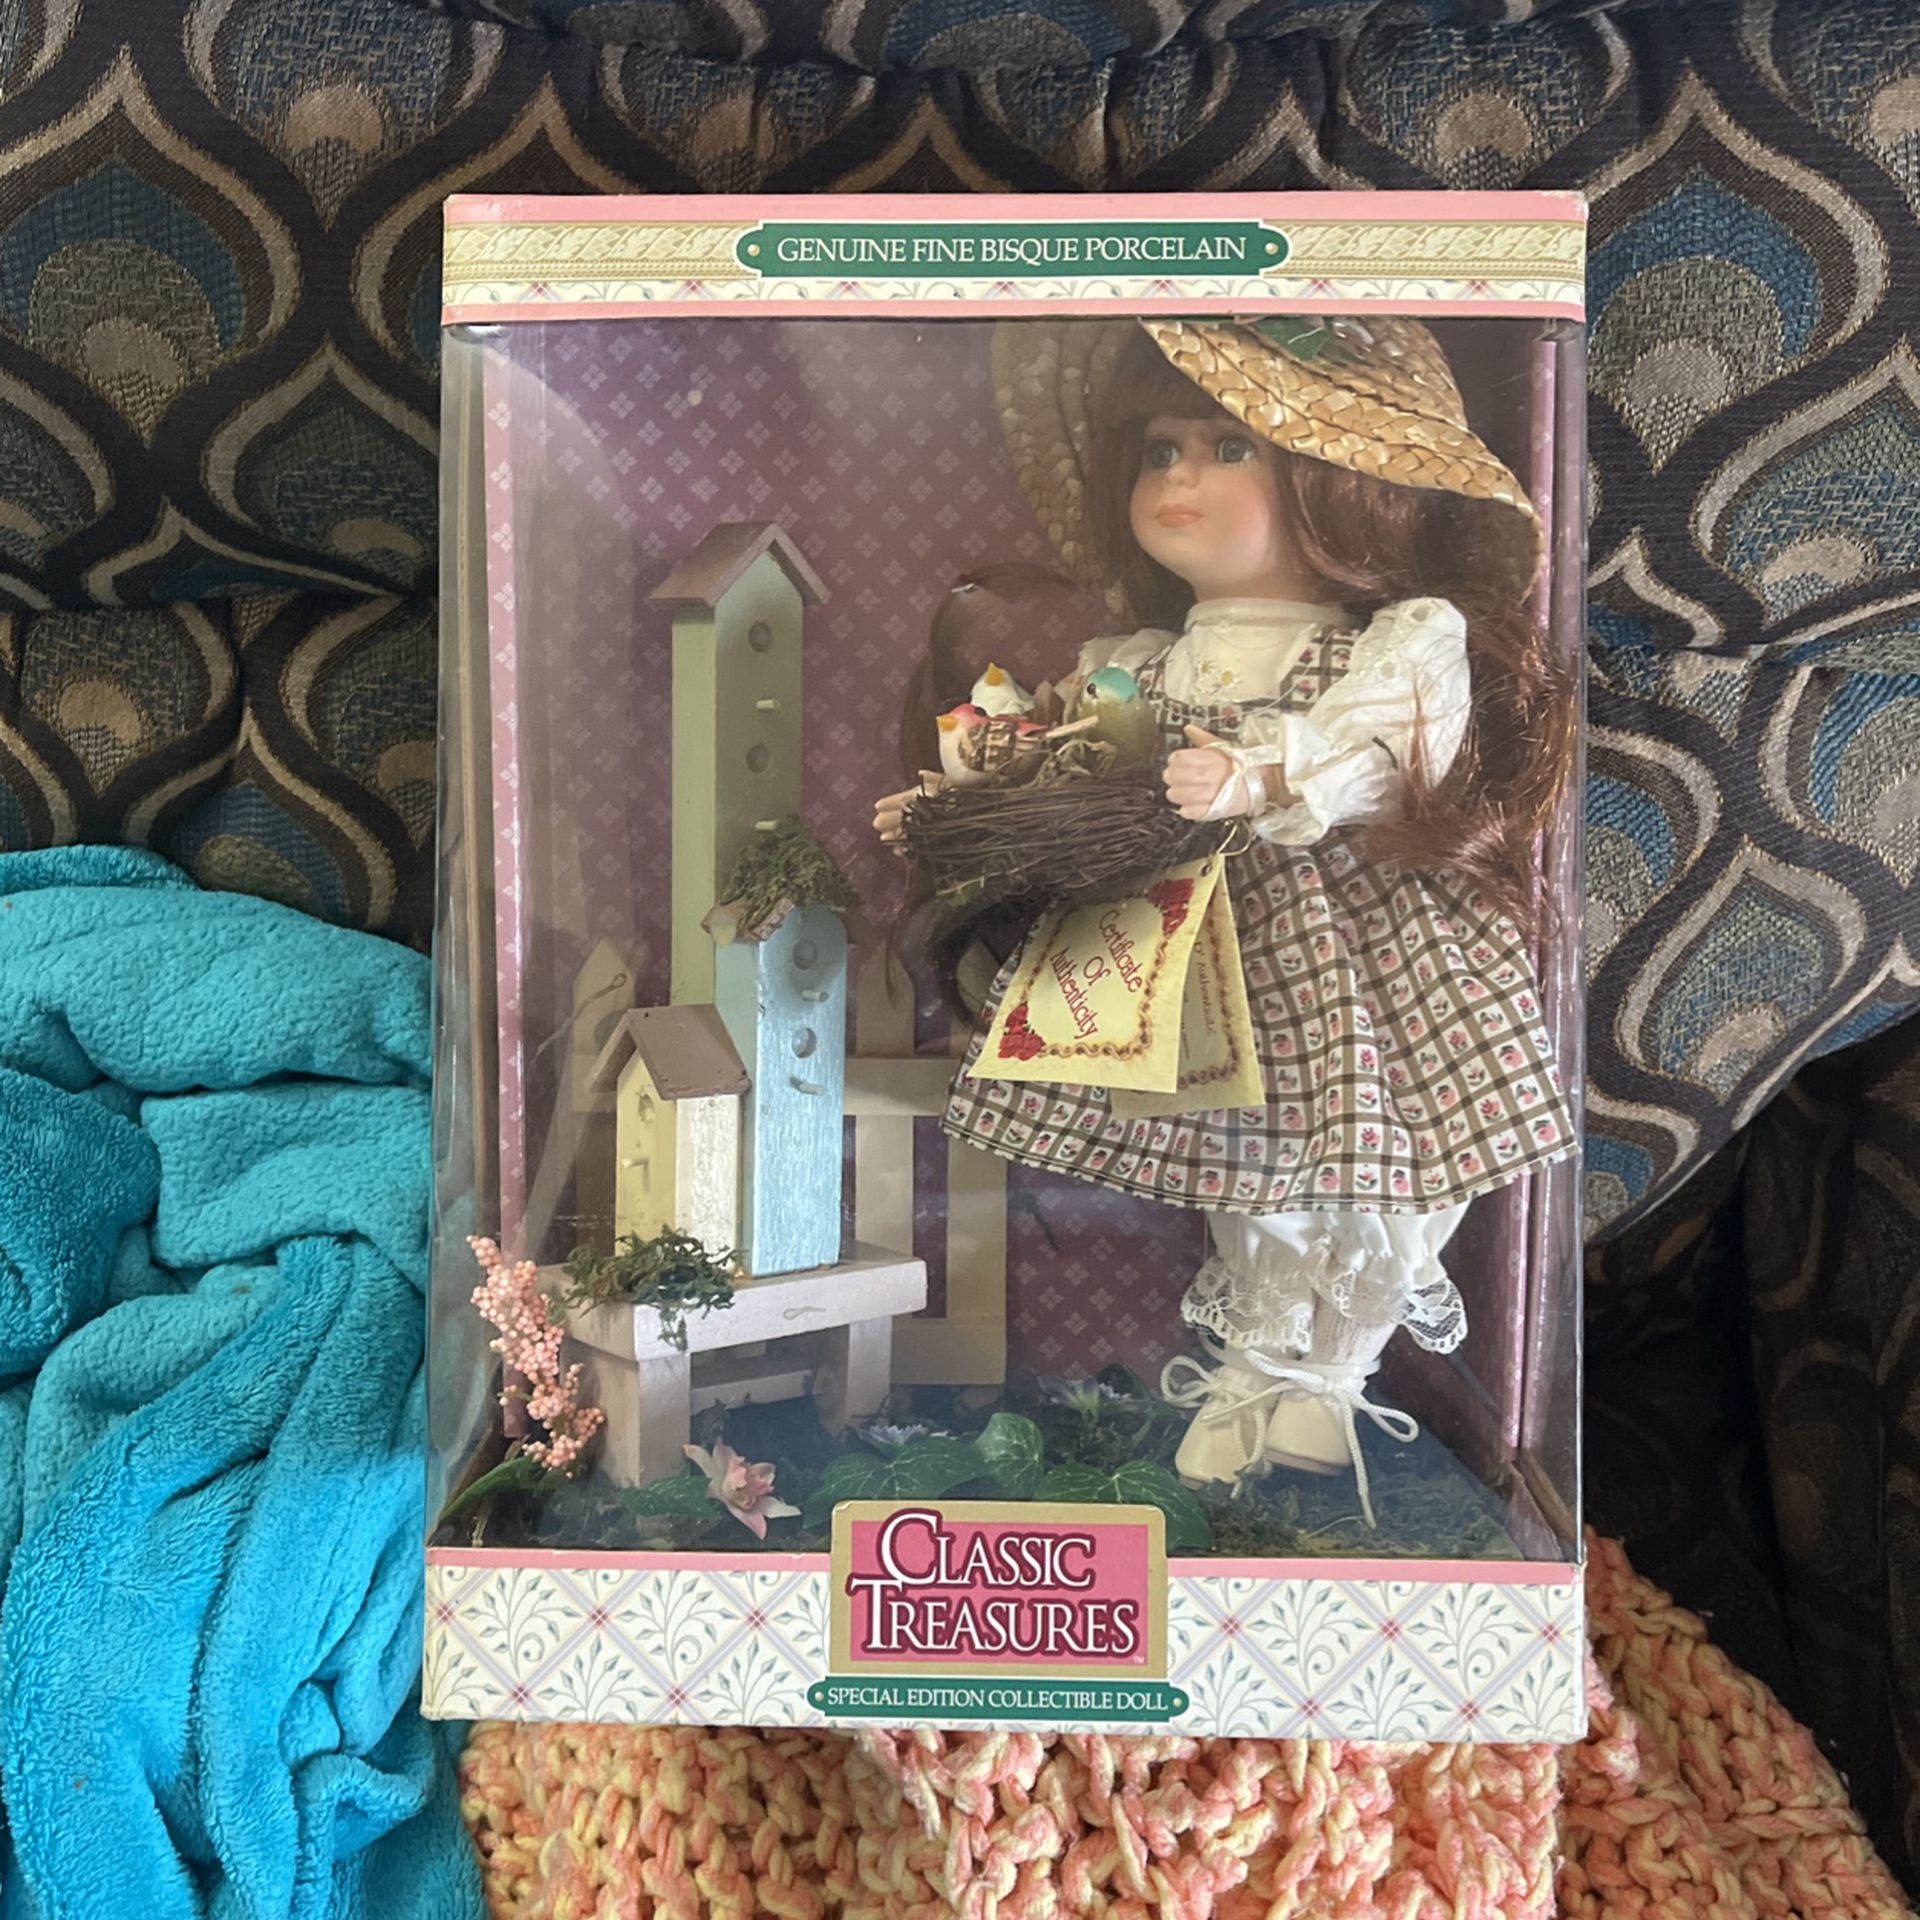 Classis Treasures Genuine Fine Bisque Porcelain Doll with bird house